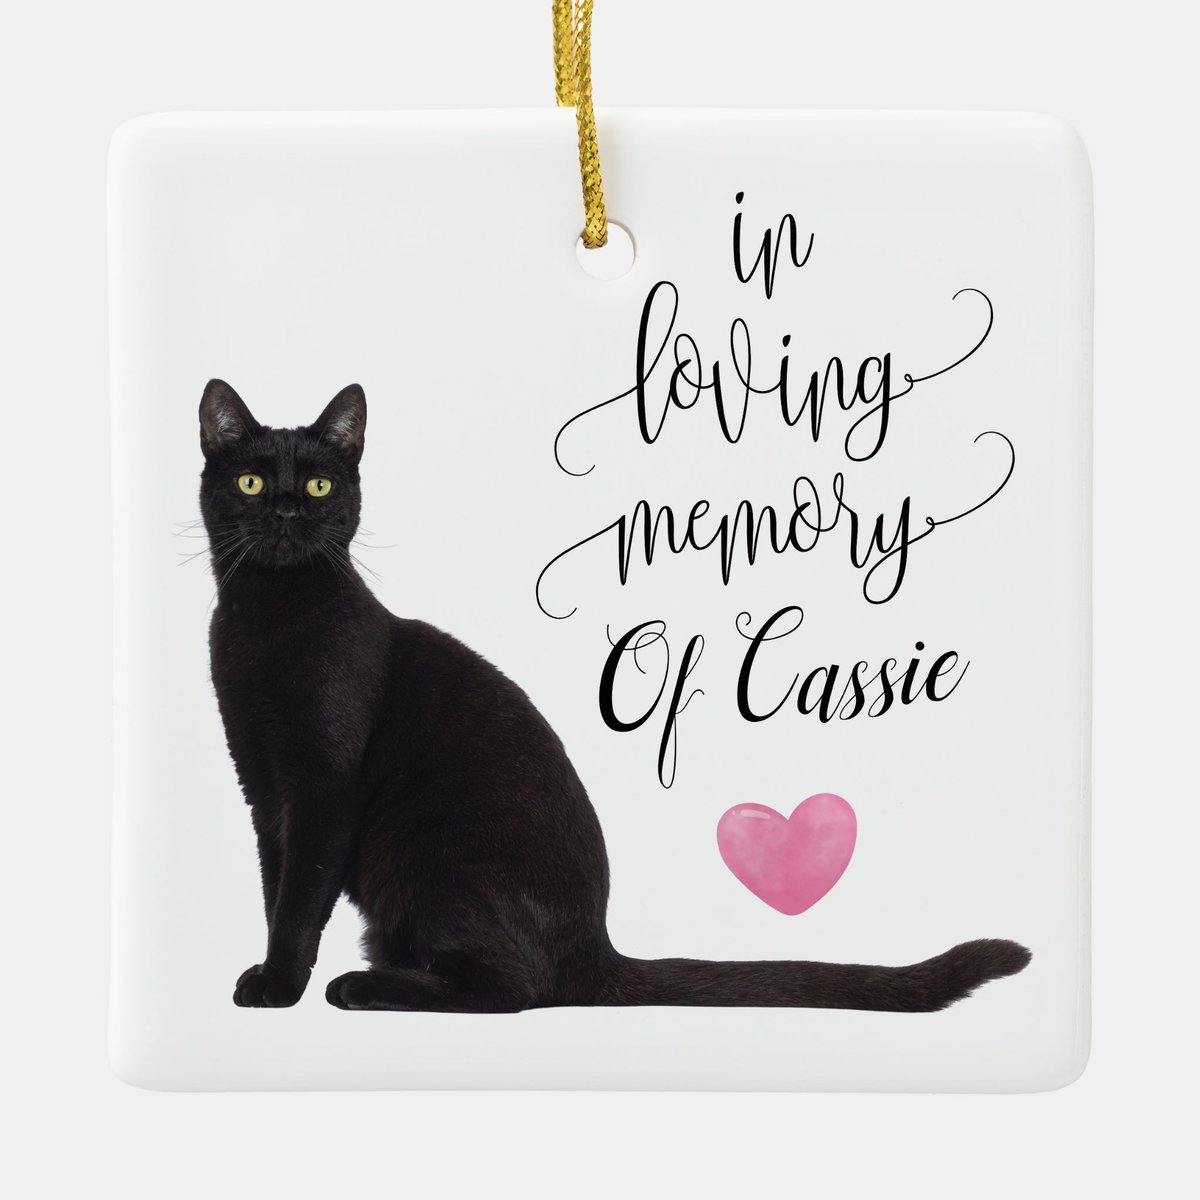 Black Cat Christmas Ornament In Memory Of Your Cat zazzle.co.uk/z/aordd6ds?rf=… via @zazzle #blackcatchristmasornaments #blackcatchristmas #catchristmasornament #christmastreedecorations #catowners #catgift #catlover #petmemorial #catmemorial #cats #blackcatart #inmemoryof